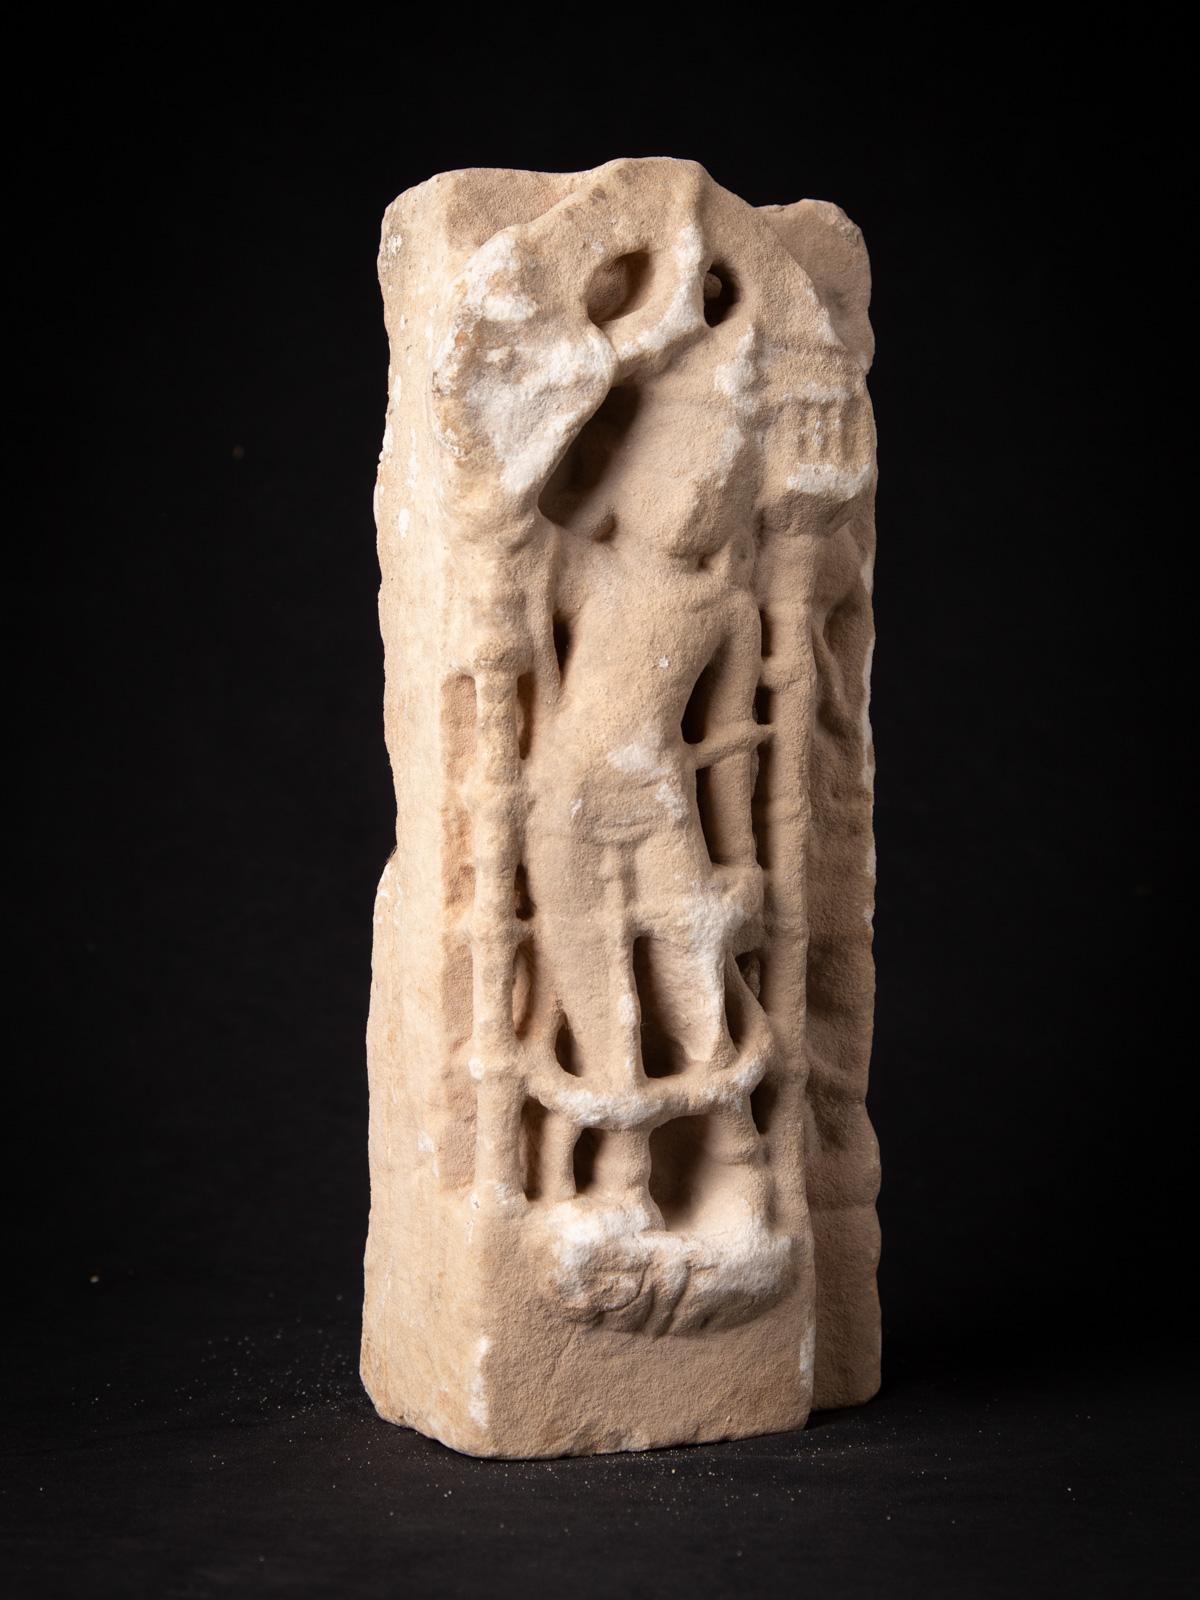 Antique marble statue from Jain temple from India, 14th century

Material : marble
32,5 cm high
14,2 cm wide and 9,5 cm deep
14th century
Originating from a temple in Rajasthan
Indra as a carrier of a flyfan. Is a permanent companion of Jina